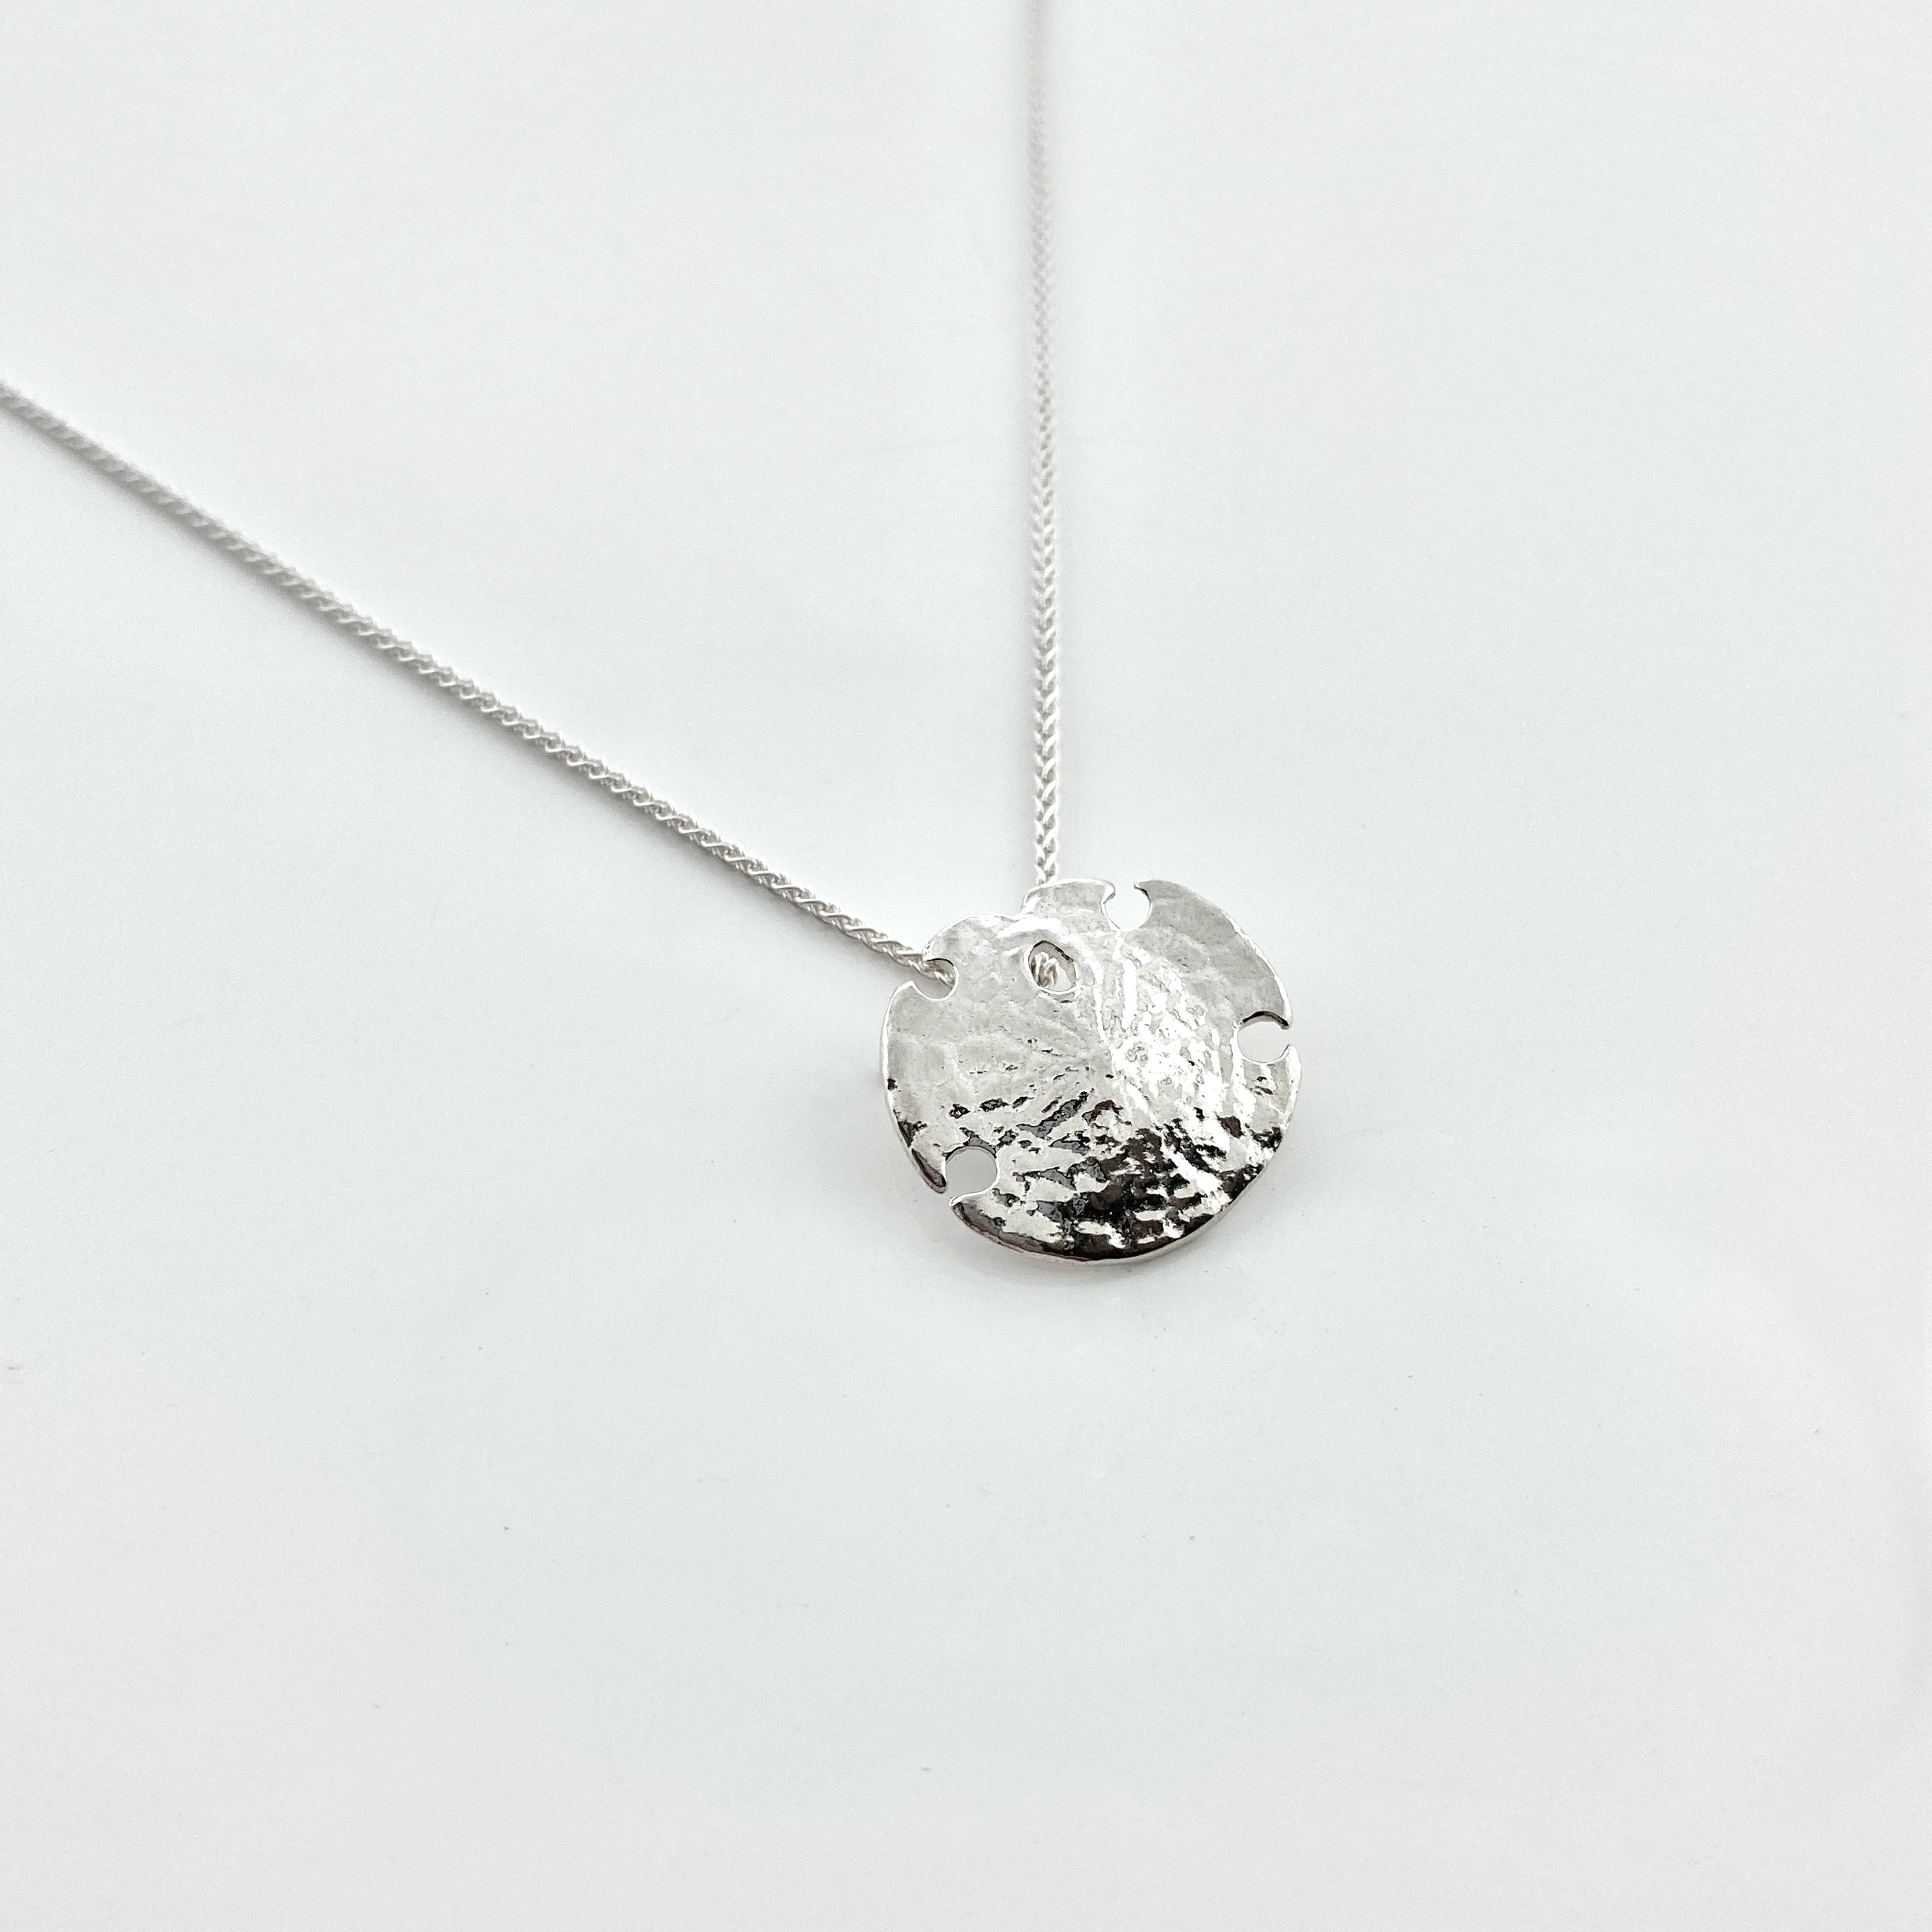 Buy Silver Sand Dollar Necklace 925 Sterling Silver Silver Adjustable  Necklace 1618 Sand Dollar Charm Online in India - Etsy